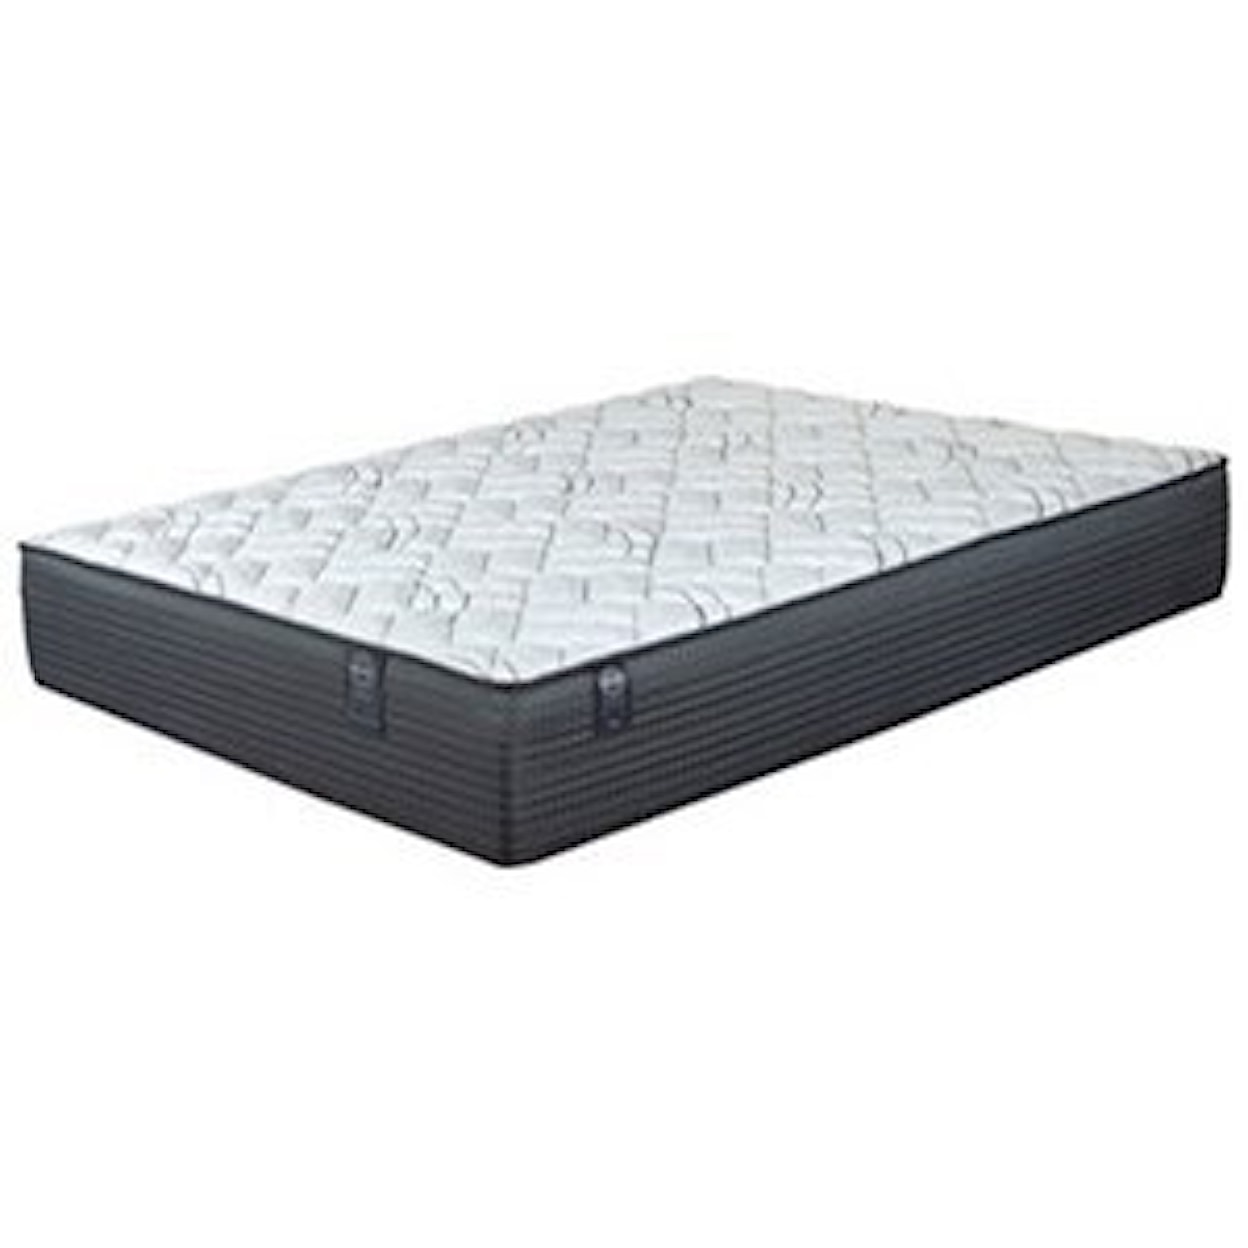 Restonic Duvall Firm King 14" Firm Two Sided Mattress